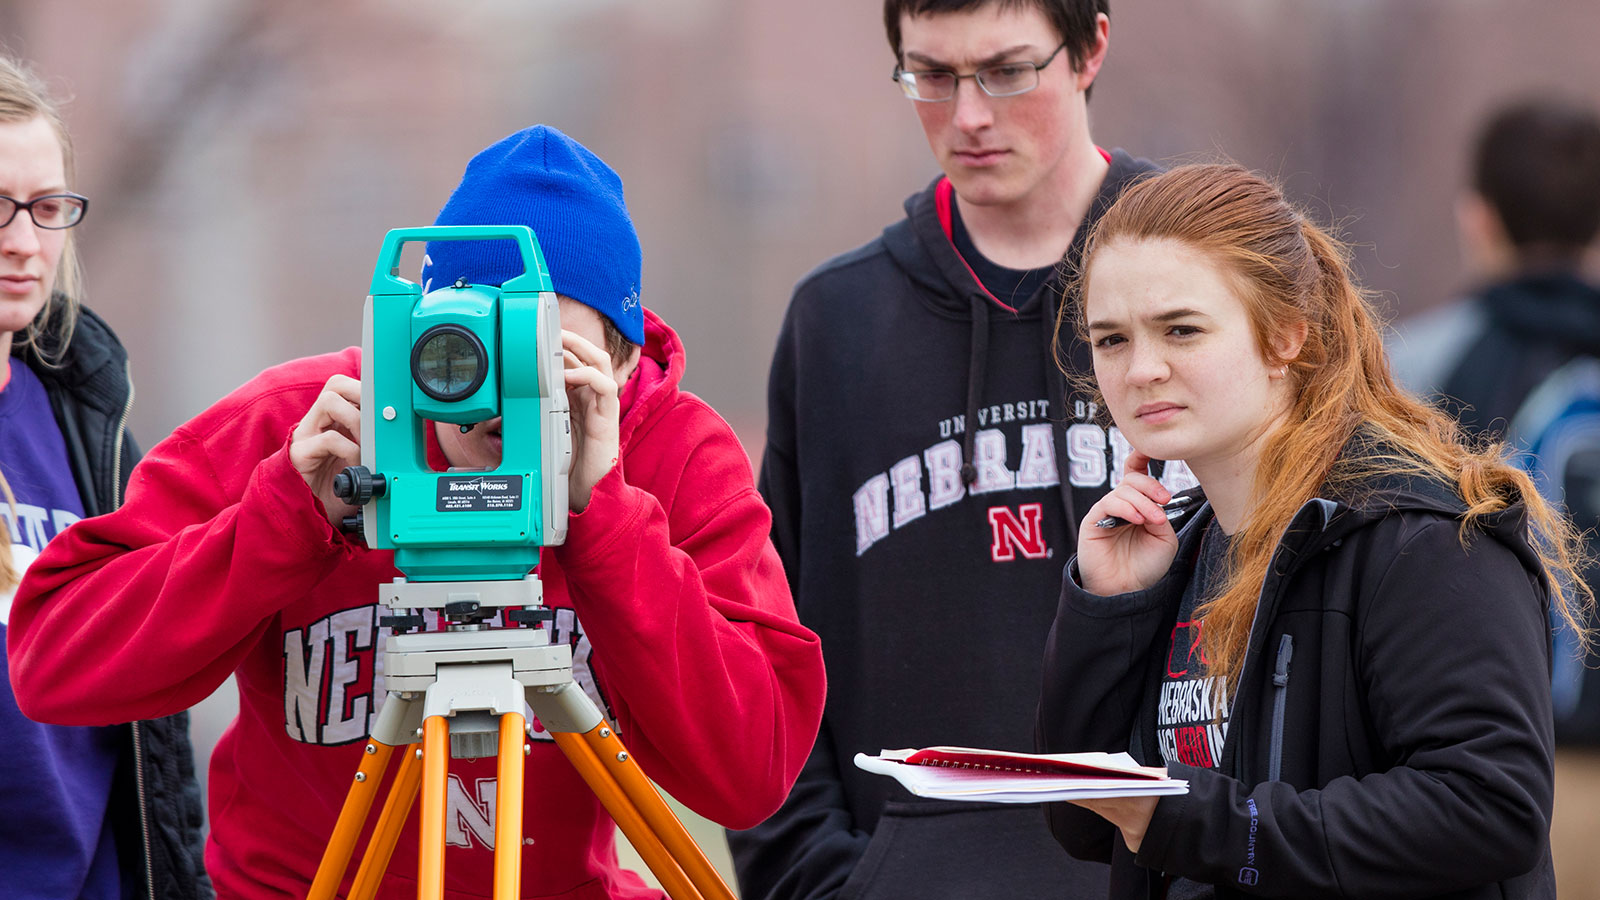 Civil students looking through a surveying instrument with other students looking on. 